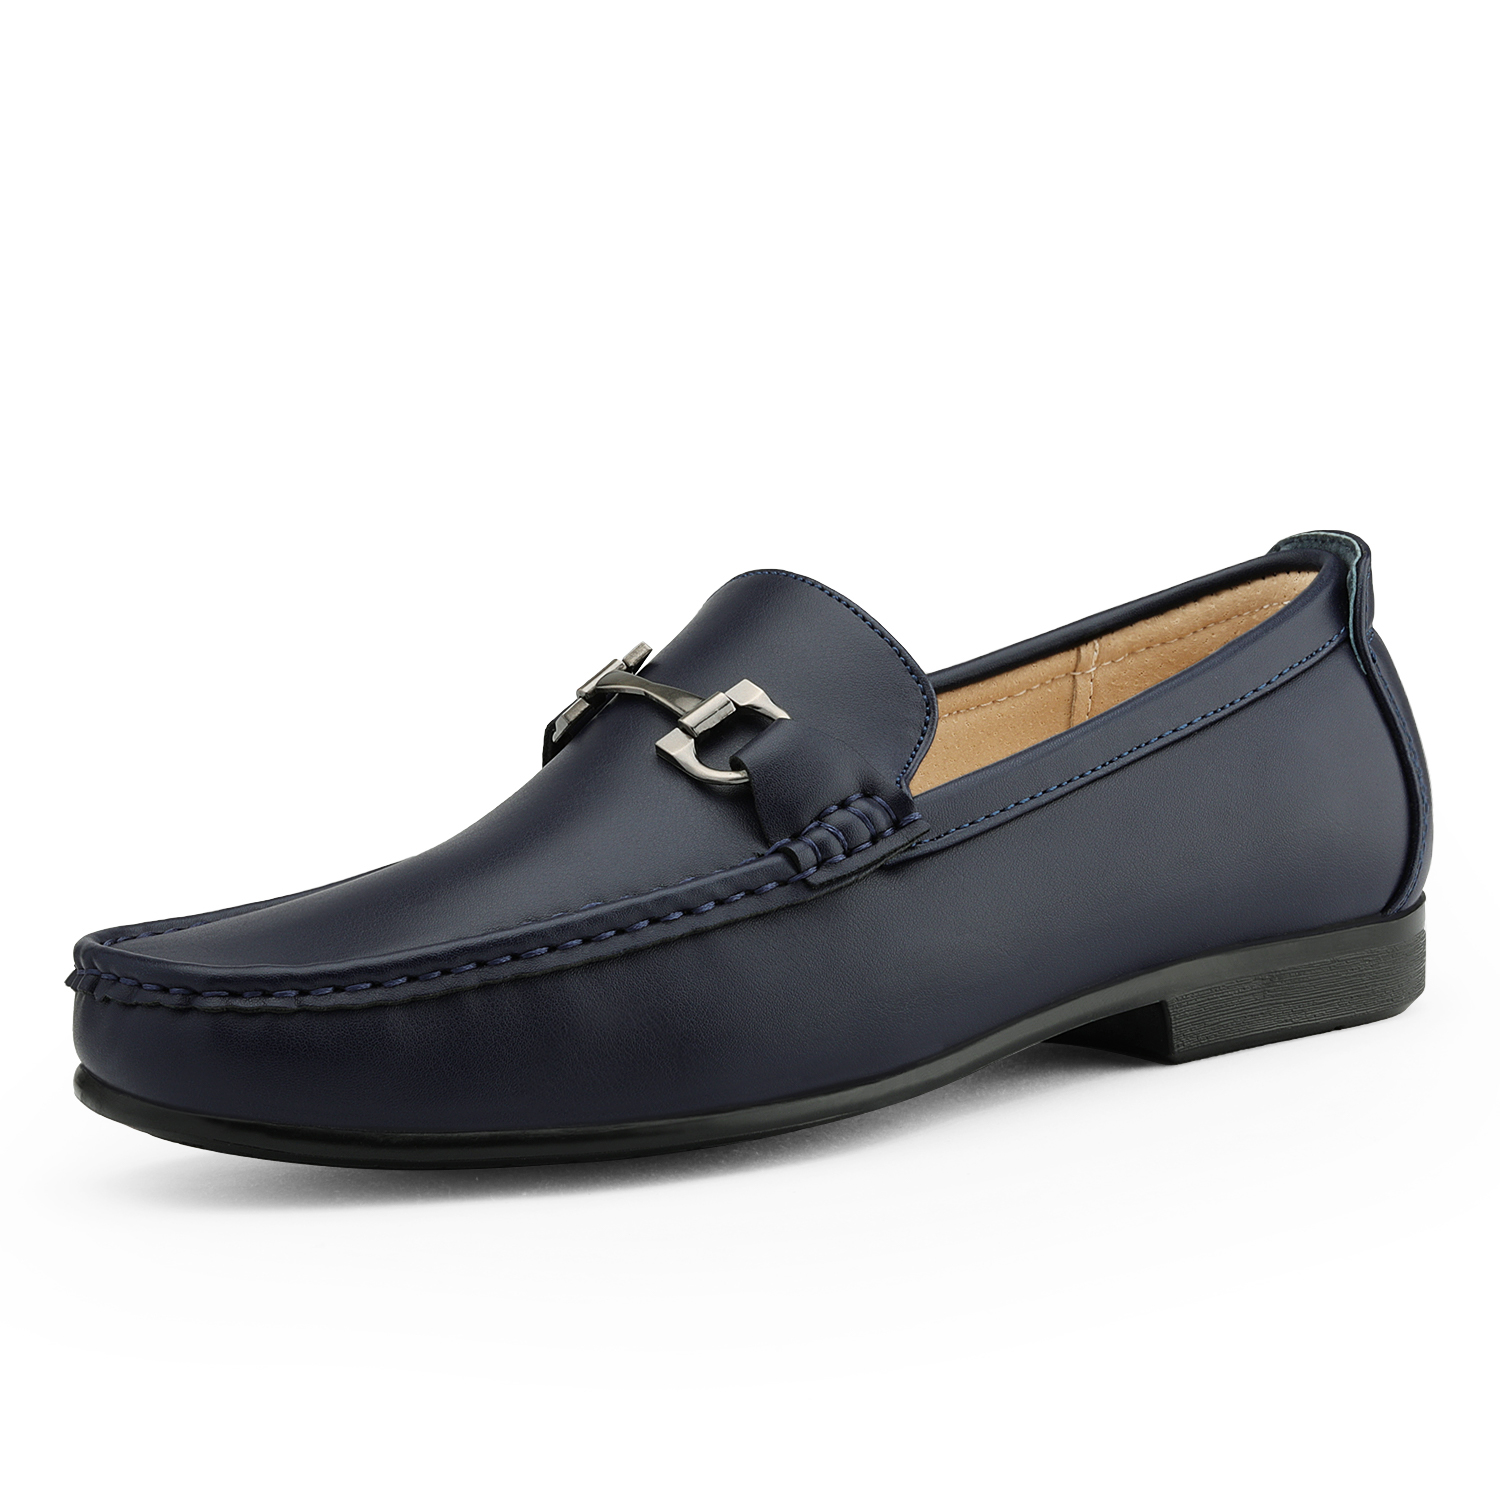 Bruno Marc Men's Moccasin Loafer Shoes Men Dress Loafers Slip On Casual Penny Comfort Outdoor Loafers HENRY-1 NAVY Size 9.5 - image 1 of 5